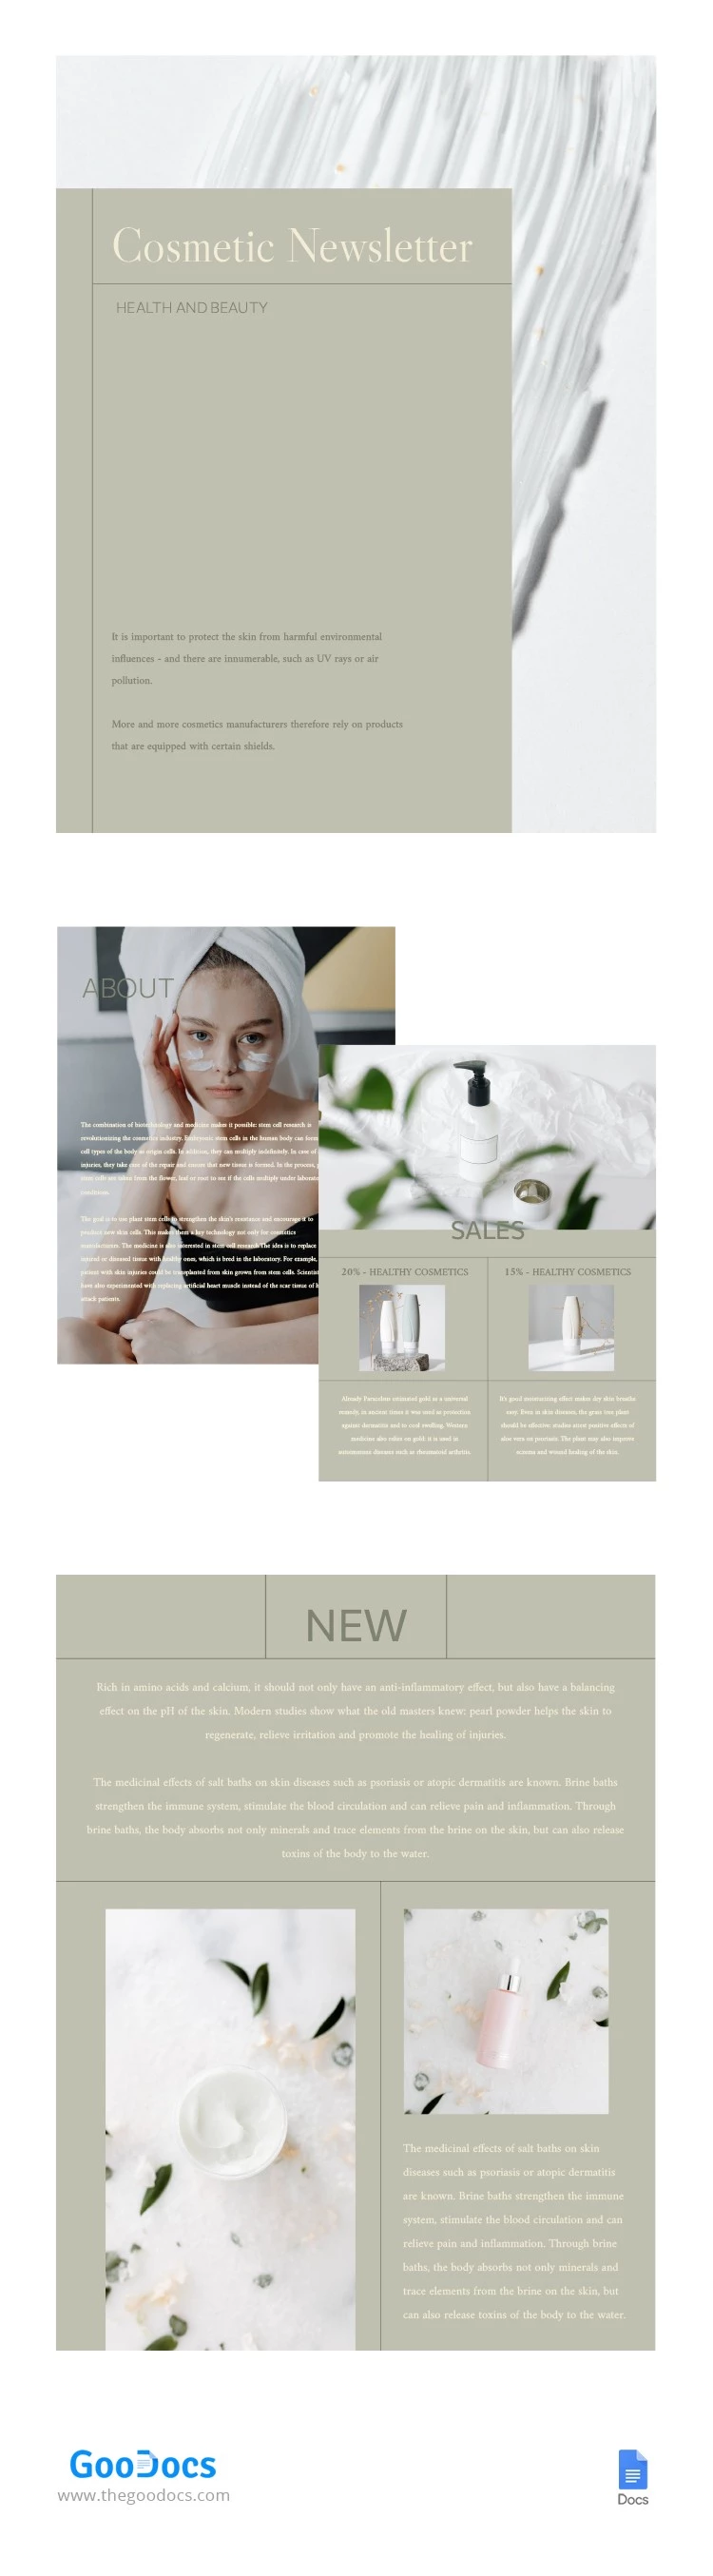 Newsletter cosmetica di Olive - free Google Docs Template - 10063022